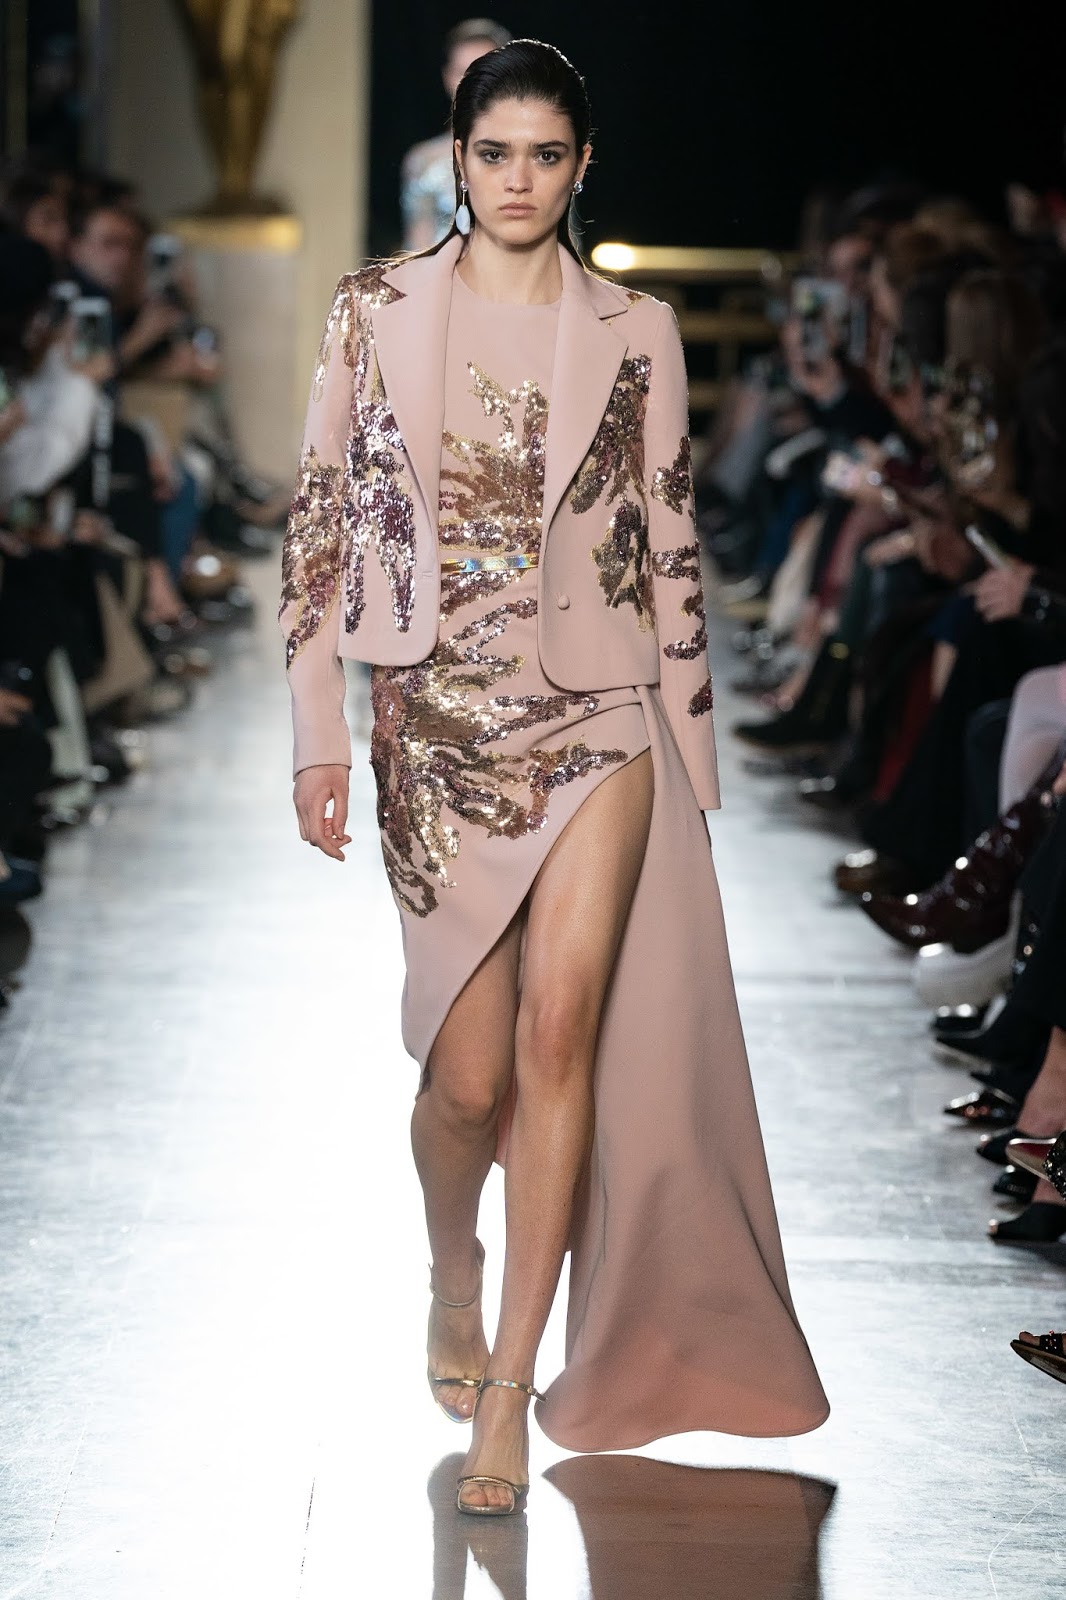 Glimmer and Sparkle: Elie Saab